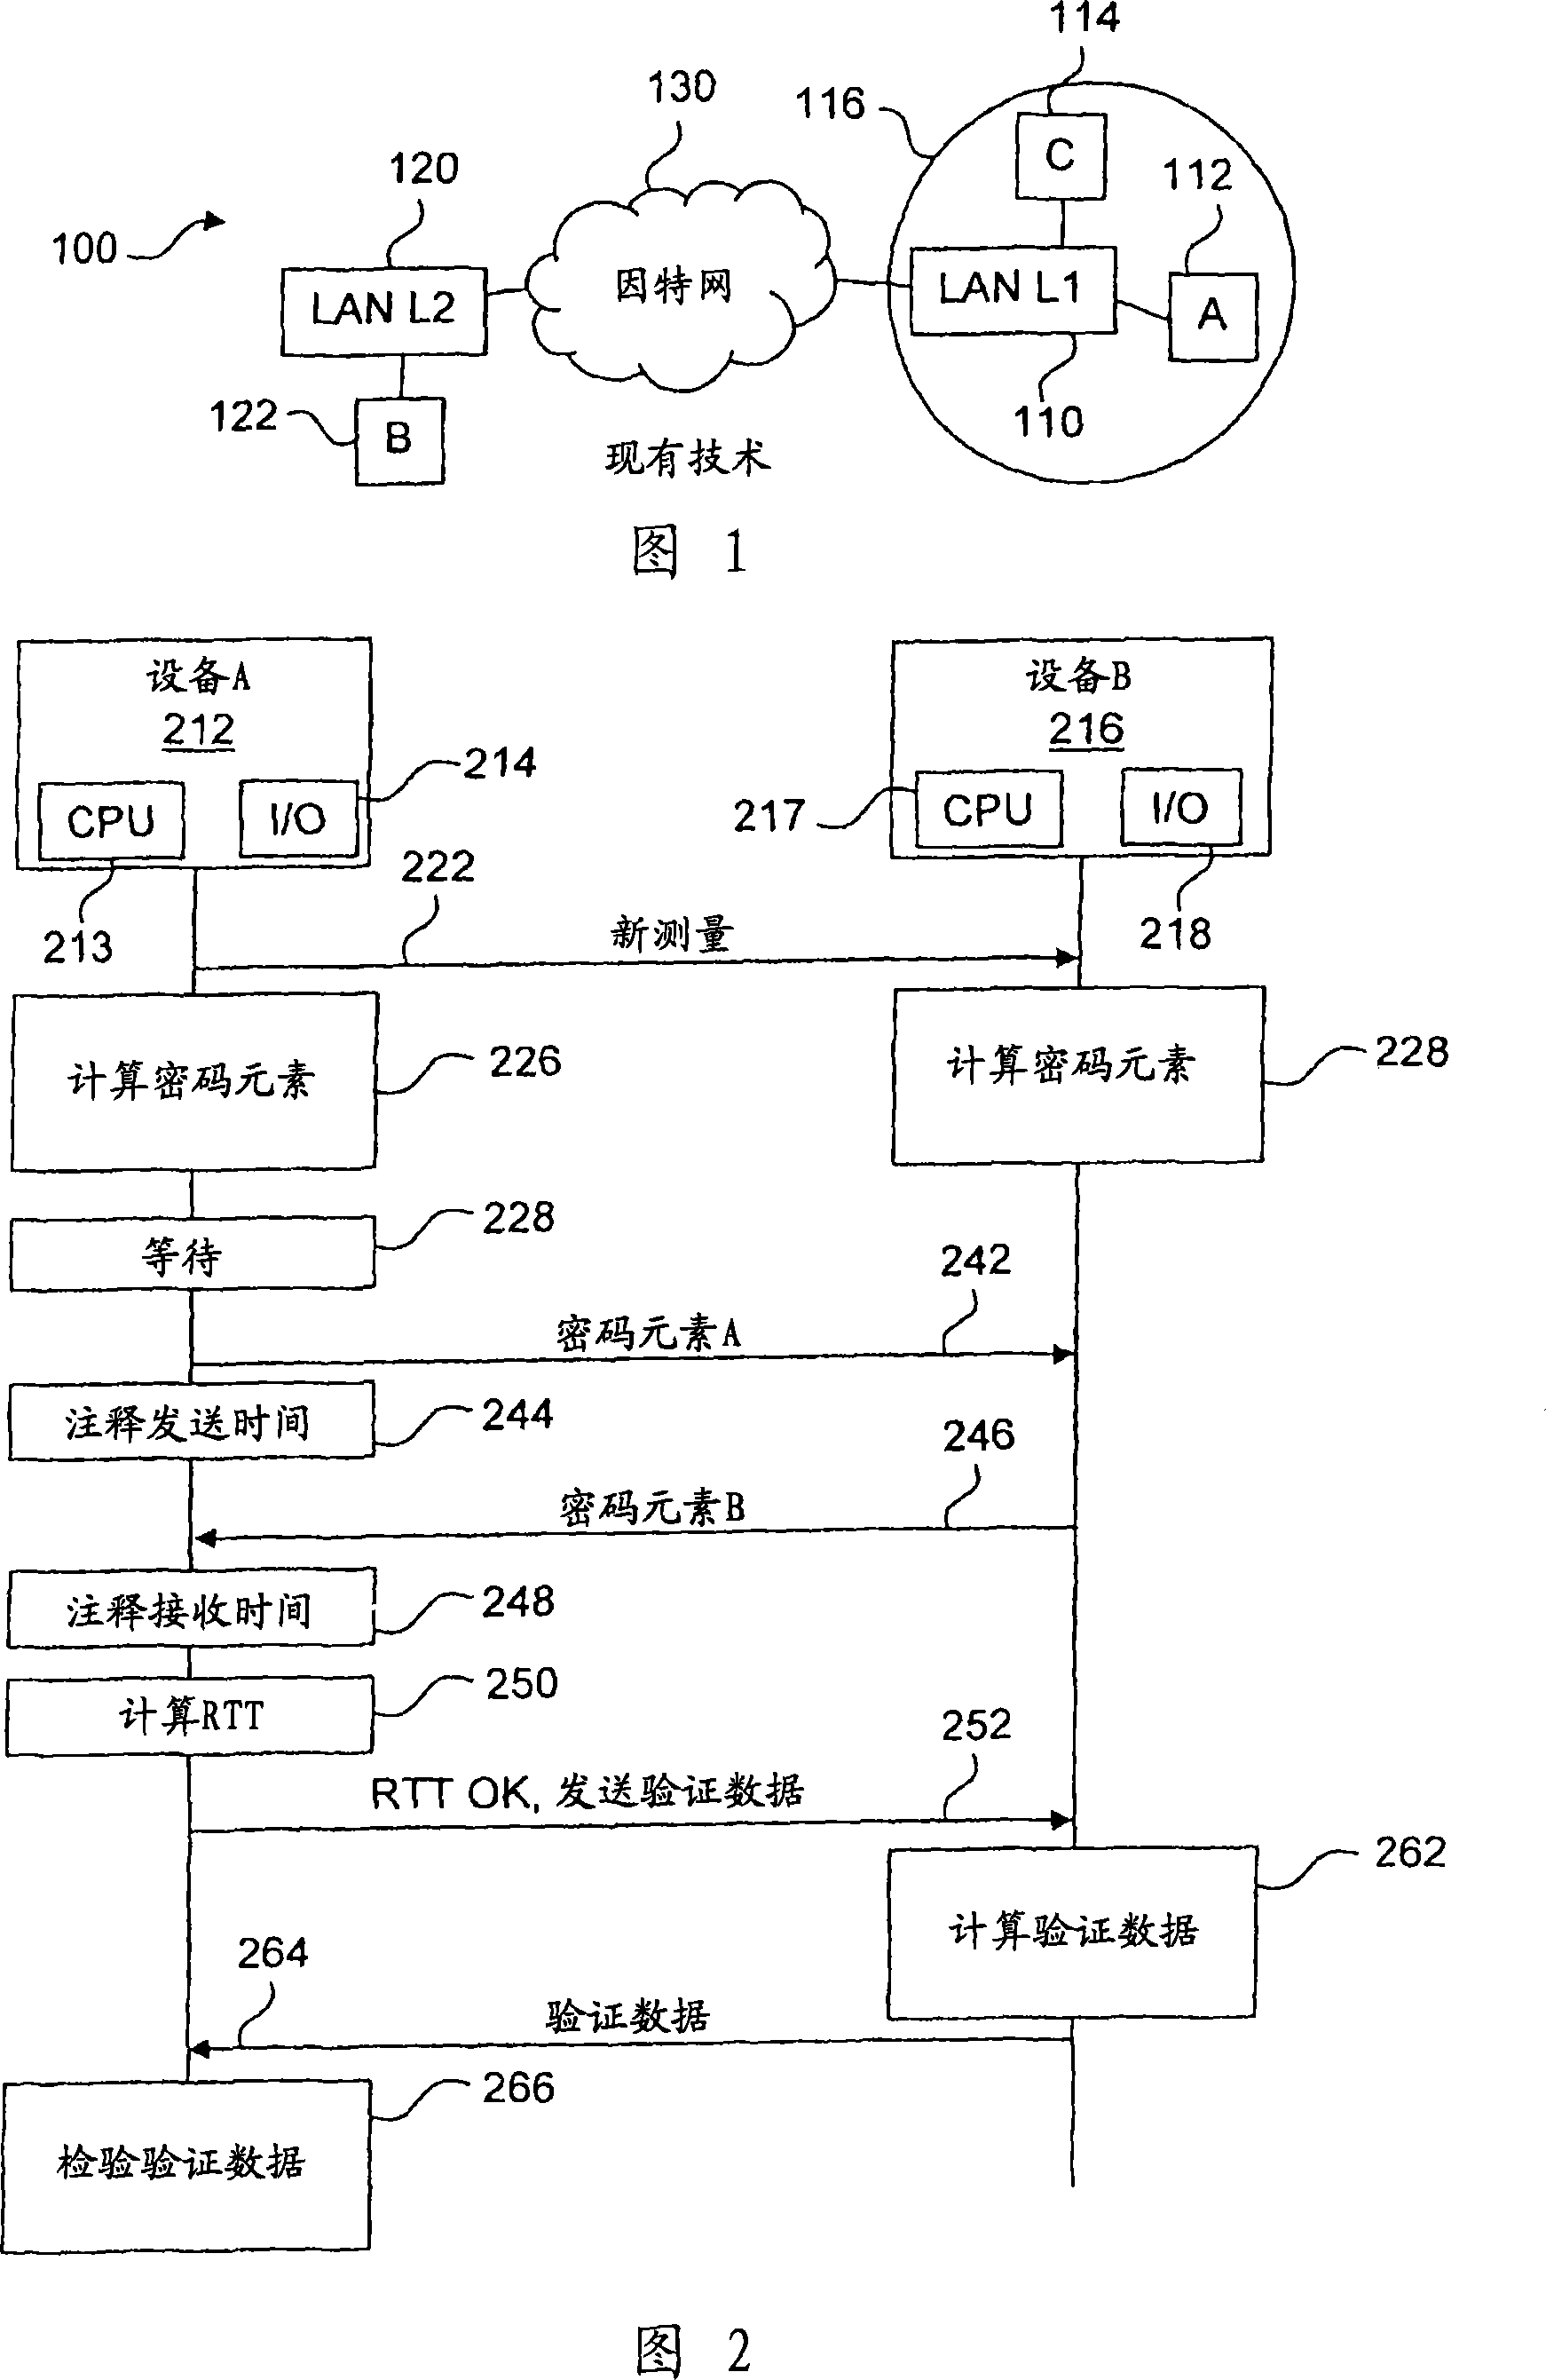 Method and devices for secure measurements of time-based distance between two devices